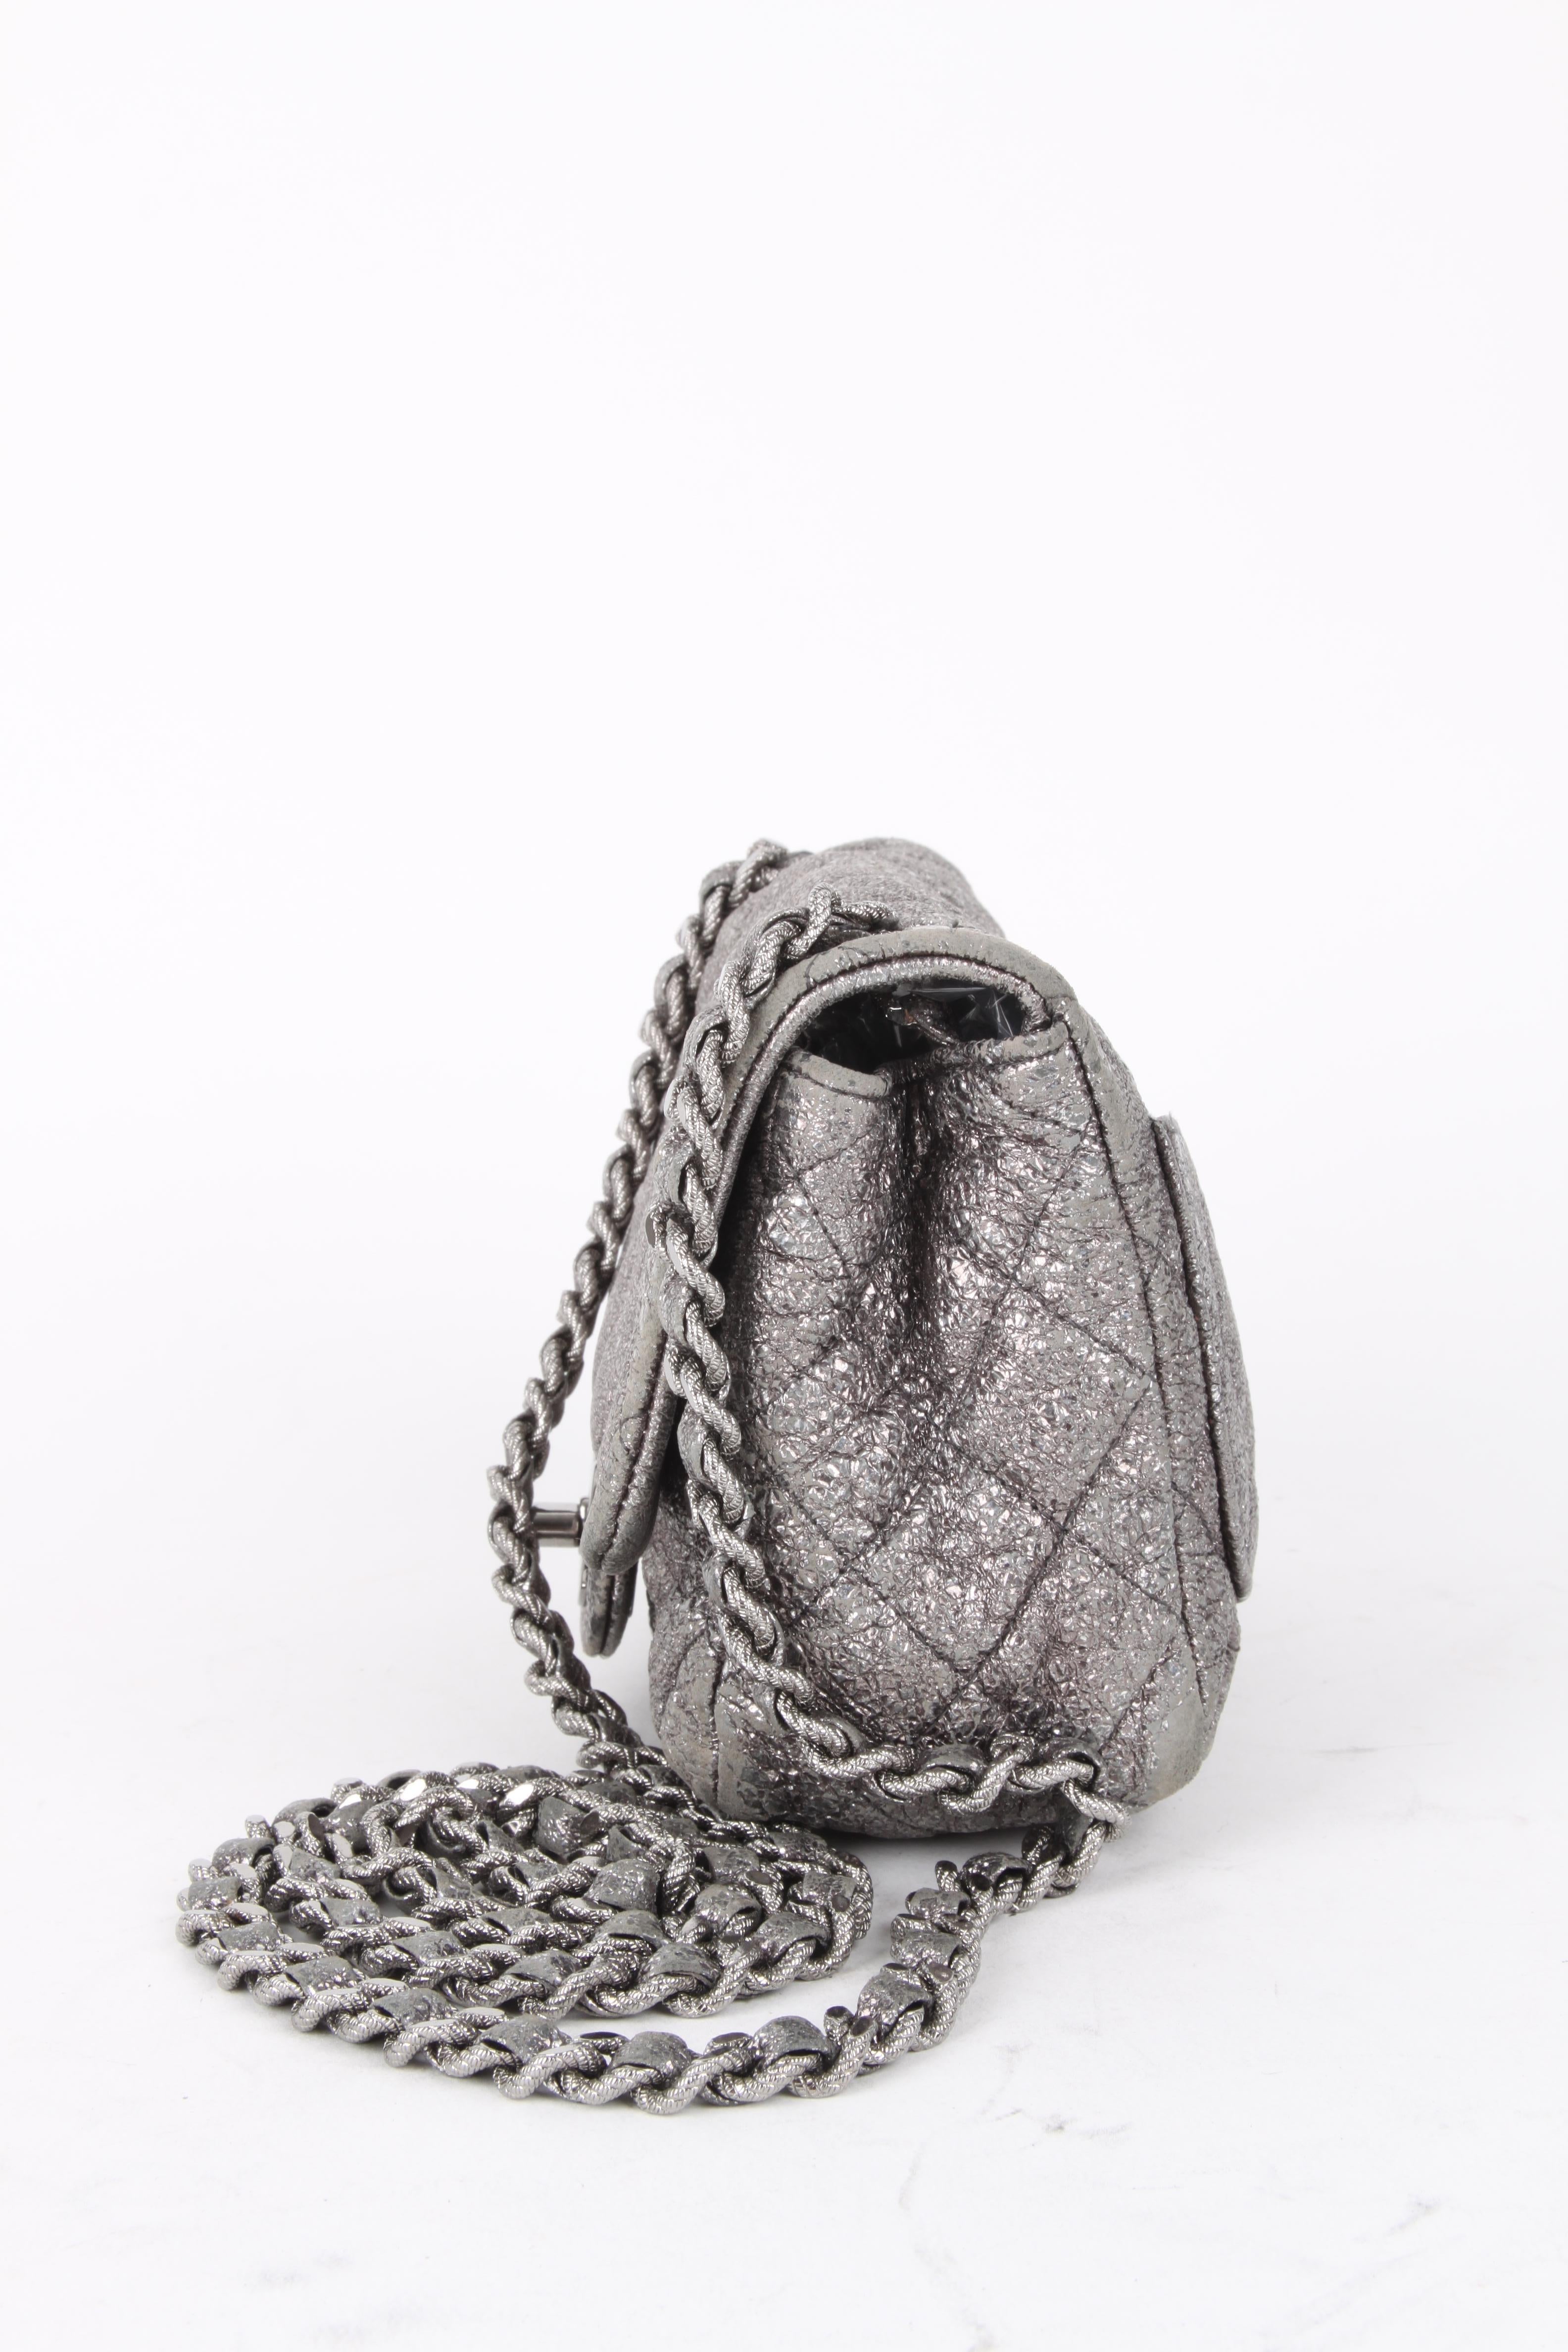 Chanel Silver Quilted Small Flap Crossbody Bag.

This little bag makes a big statement. It features a silver coated fabric exterior with matching iridescent grey leather woven handle. The bag features an grey leather lining, CC-logo fastening